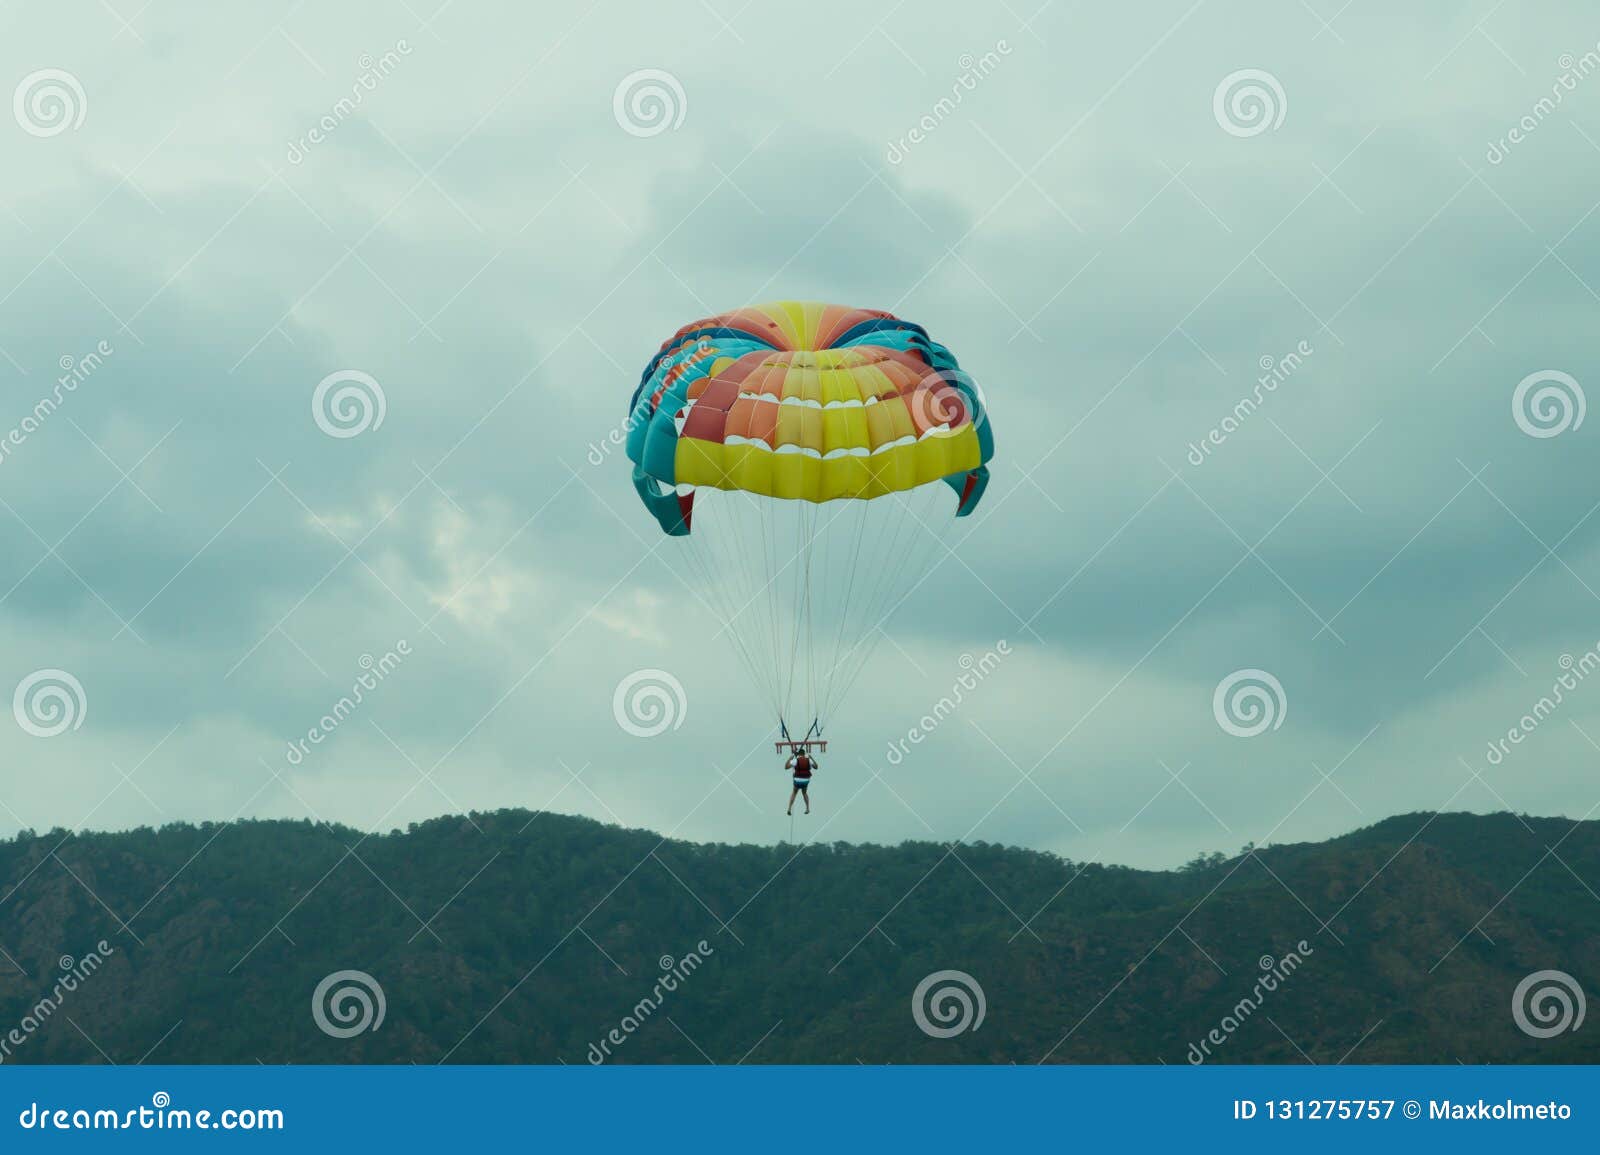 Skydiver Flying With A Colorful Parachute On Sky Background Editorial